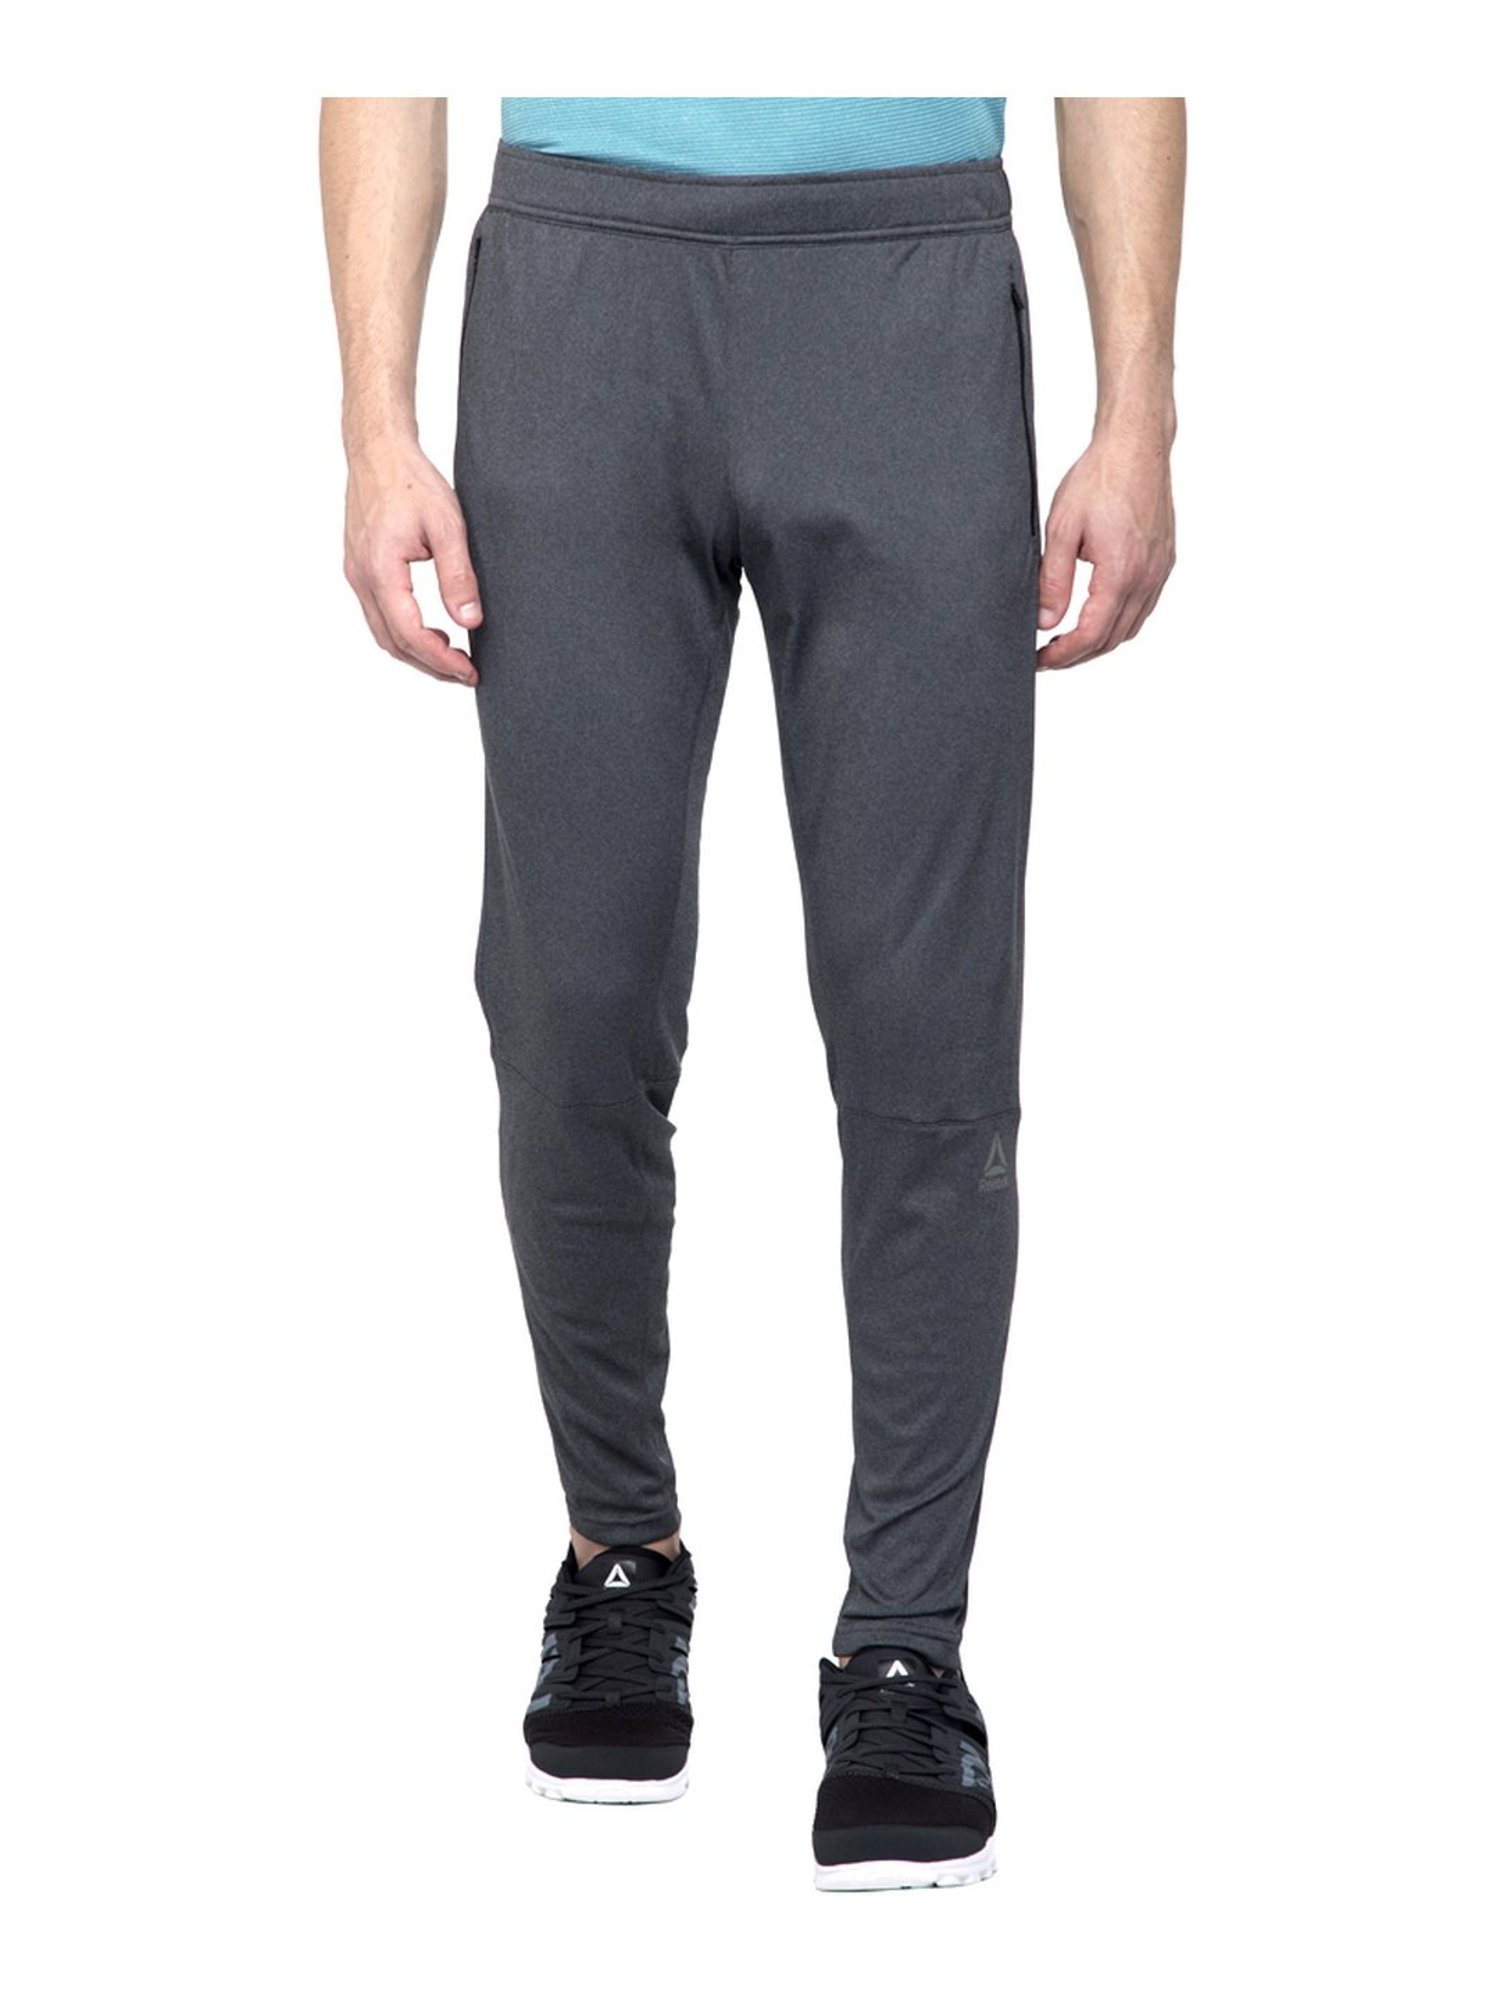 Knit Trackster Dark Grey Training Track Pants 5776245.htm - Buy Knit  Trackster Dark Grey Training Track Pants 5776245.htm online in India